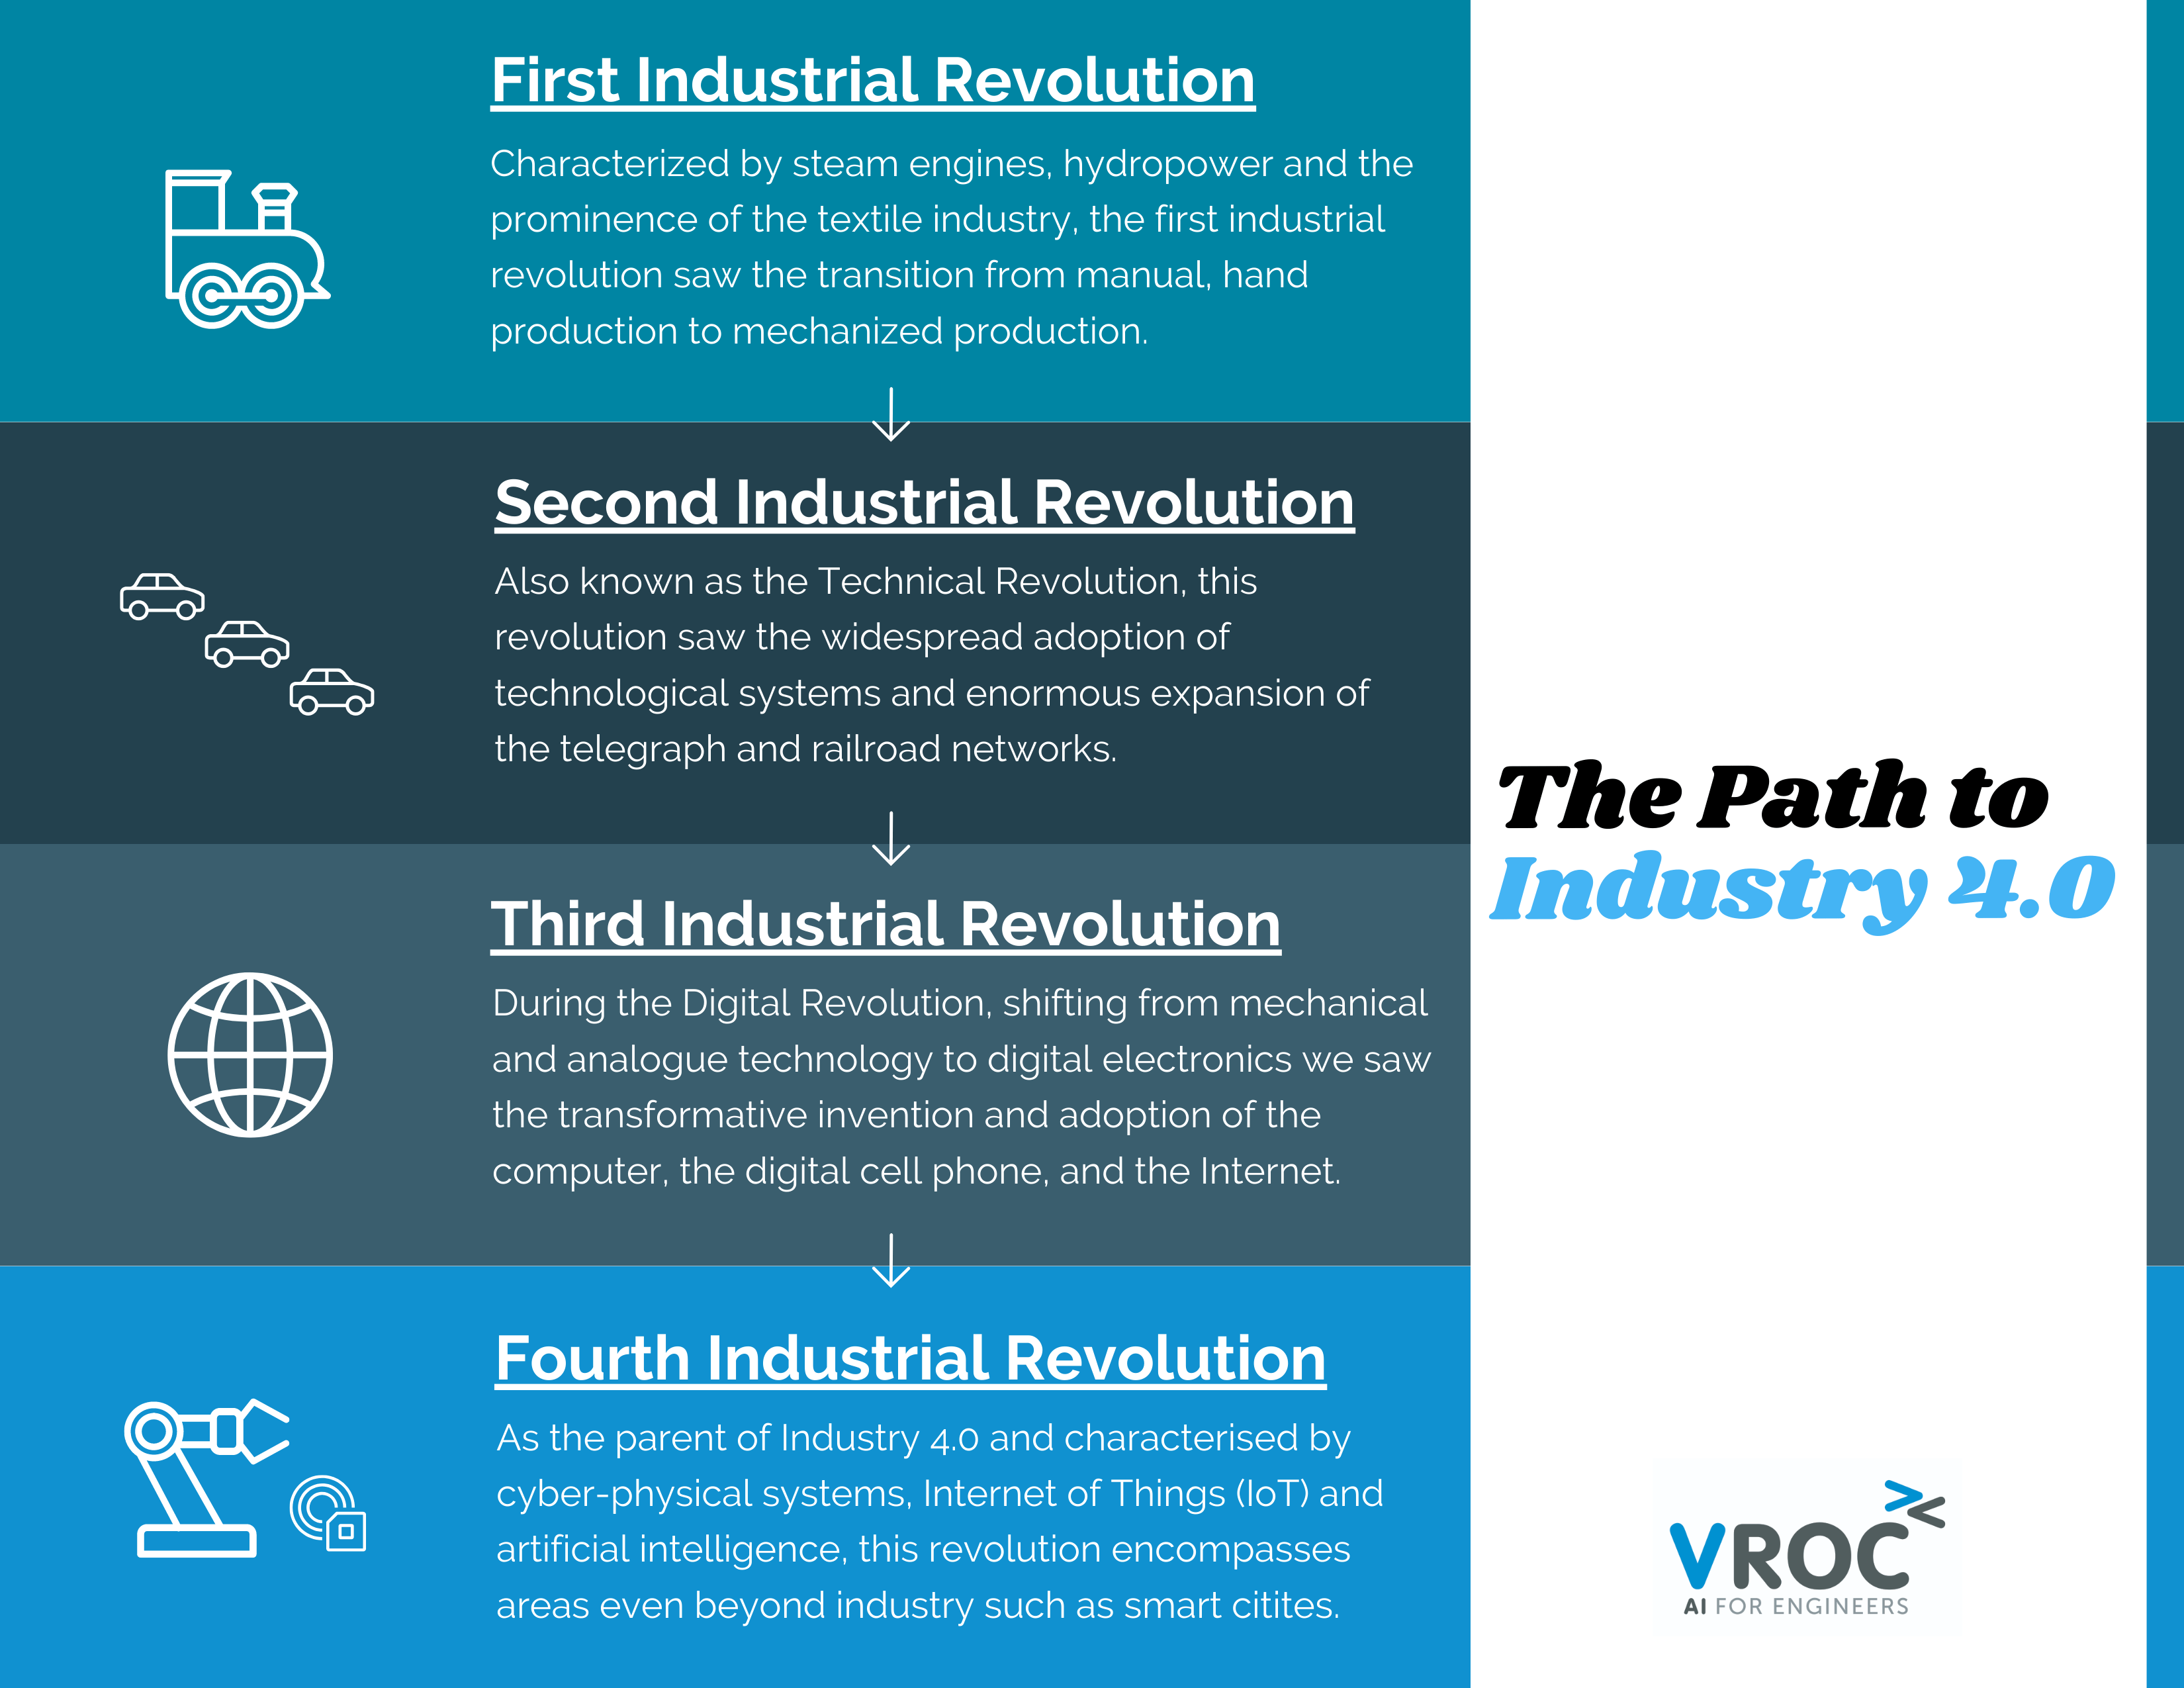 The path to Industry 4.0. Infographic